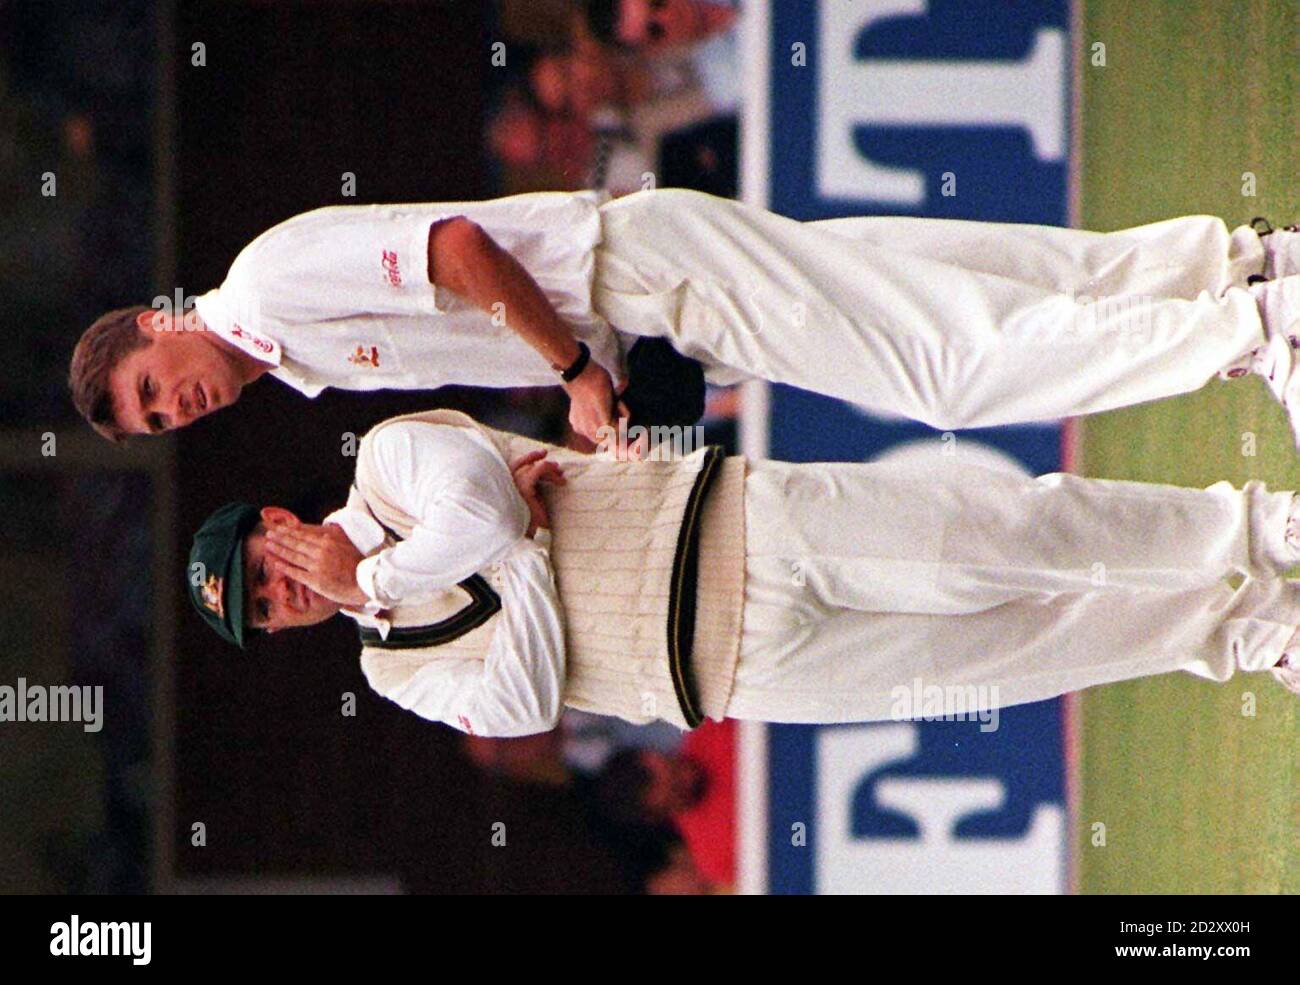 No answers seem to spring to mind as Australian Captain Mark Taylor (left) ponders on how to stop England increasing their advantage over his side with bowler Glenn McGrath as England increase their lead in the First Test Match at Edgbaston today(Sat). Photo John Giles/PA. Stock Photo